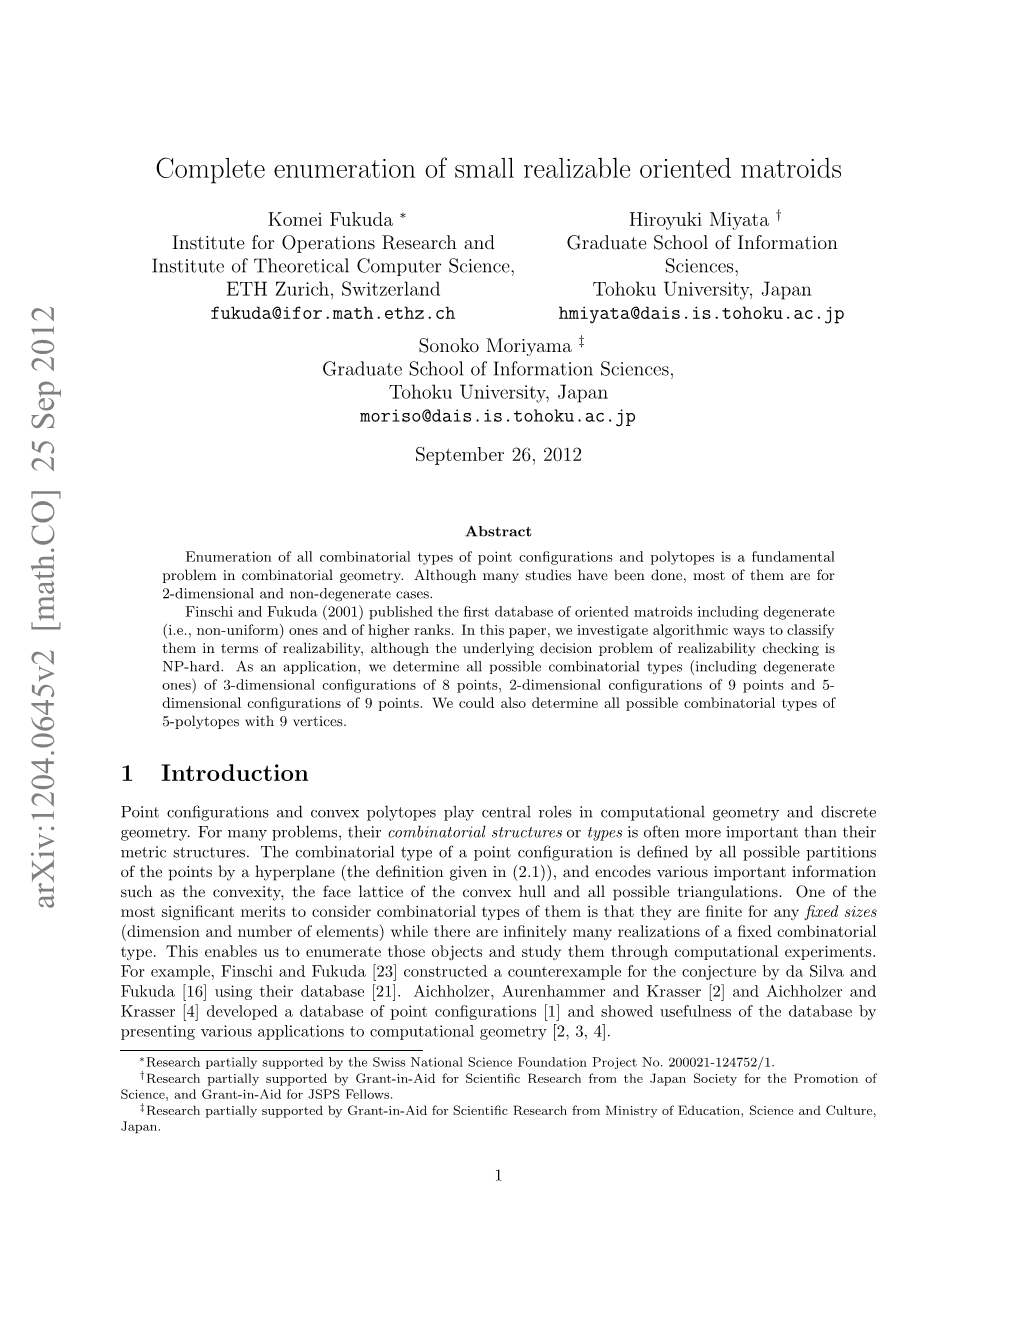 Complete Enumeration of Small Realizable Oriented Matroids